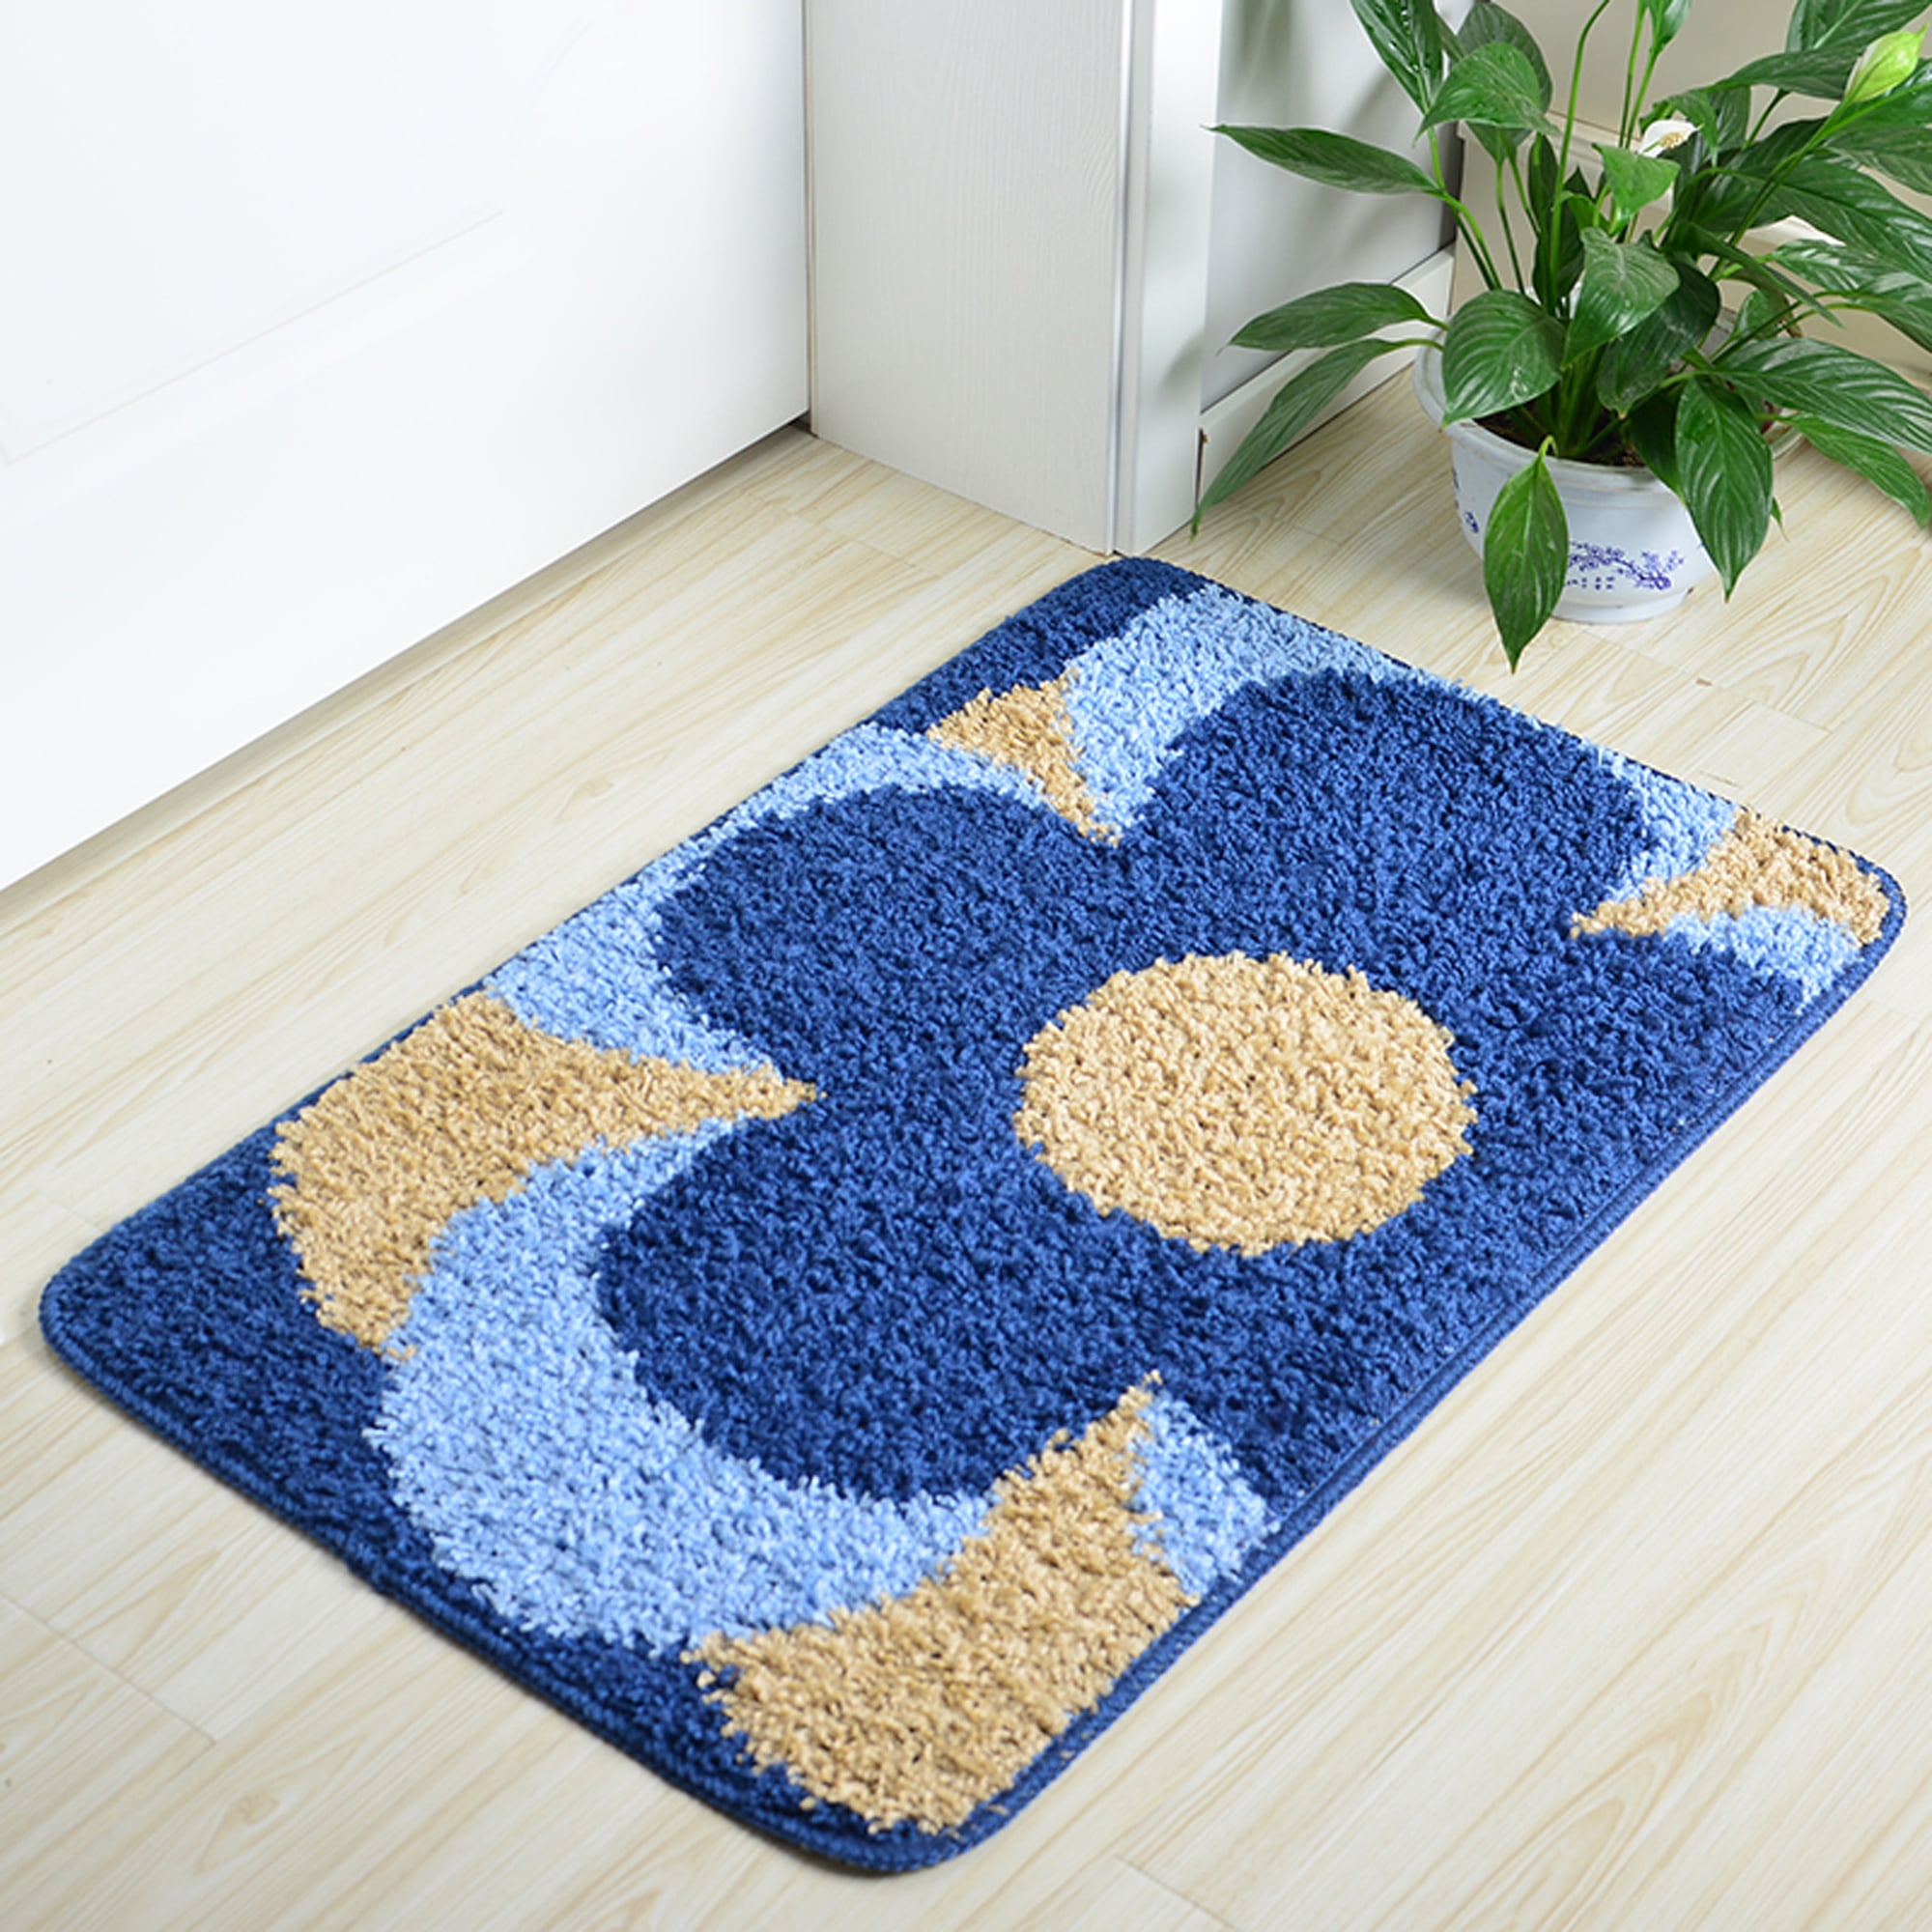 Front Door Mat Welcome Mats, SOCOOL Indoor Outdoor Rug Mats for Shoe  Scraper, Ideal for Inside Outside Home High Traffic Area, 47 x 32 Blue  Yellow Flower,DM2509M 